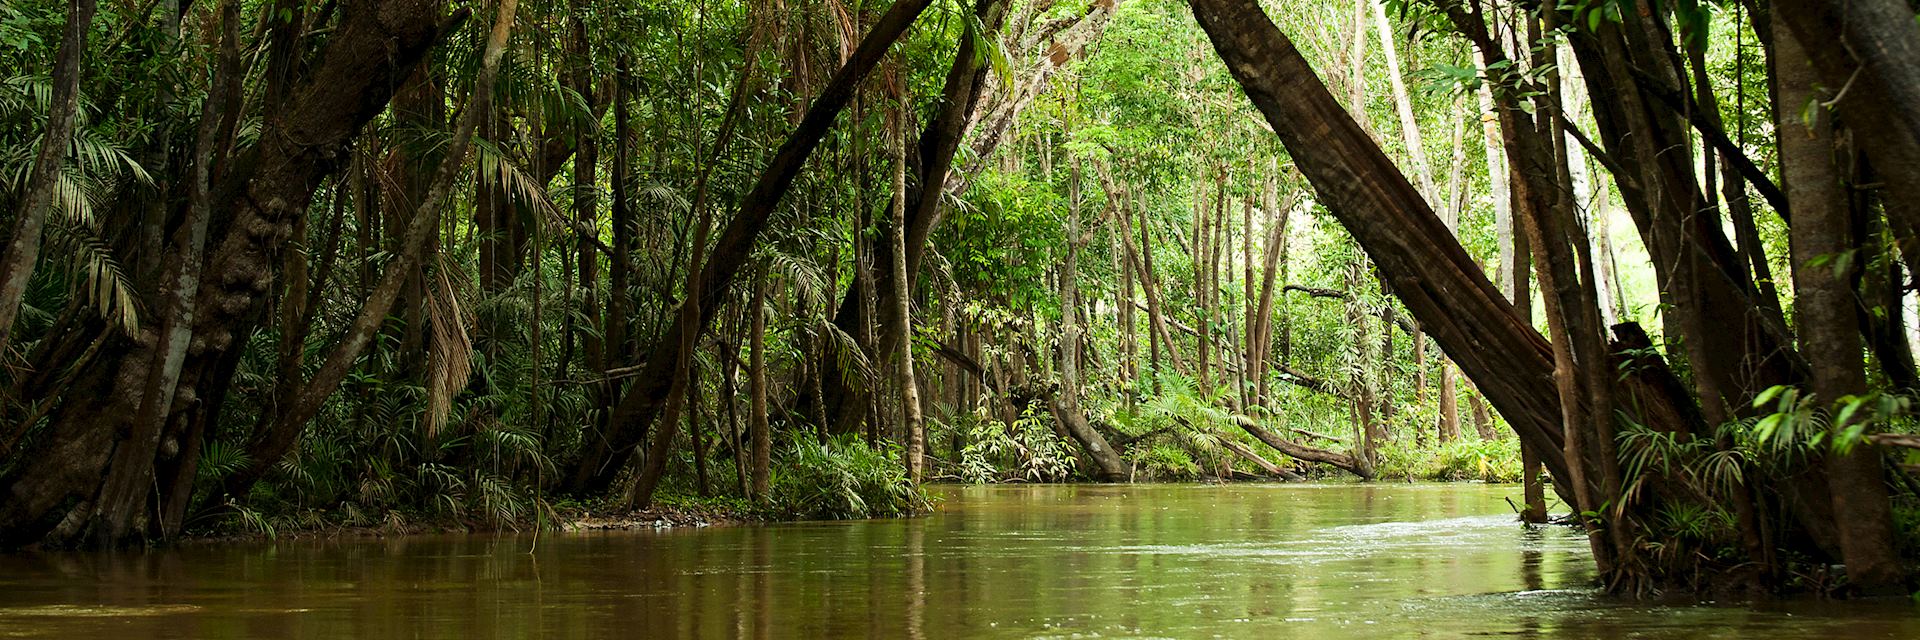 Where to go in the Amazon | Audley Travel